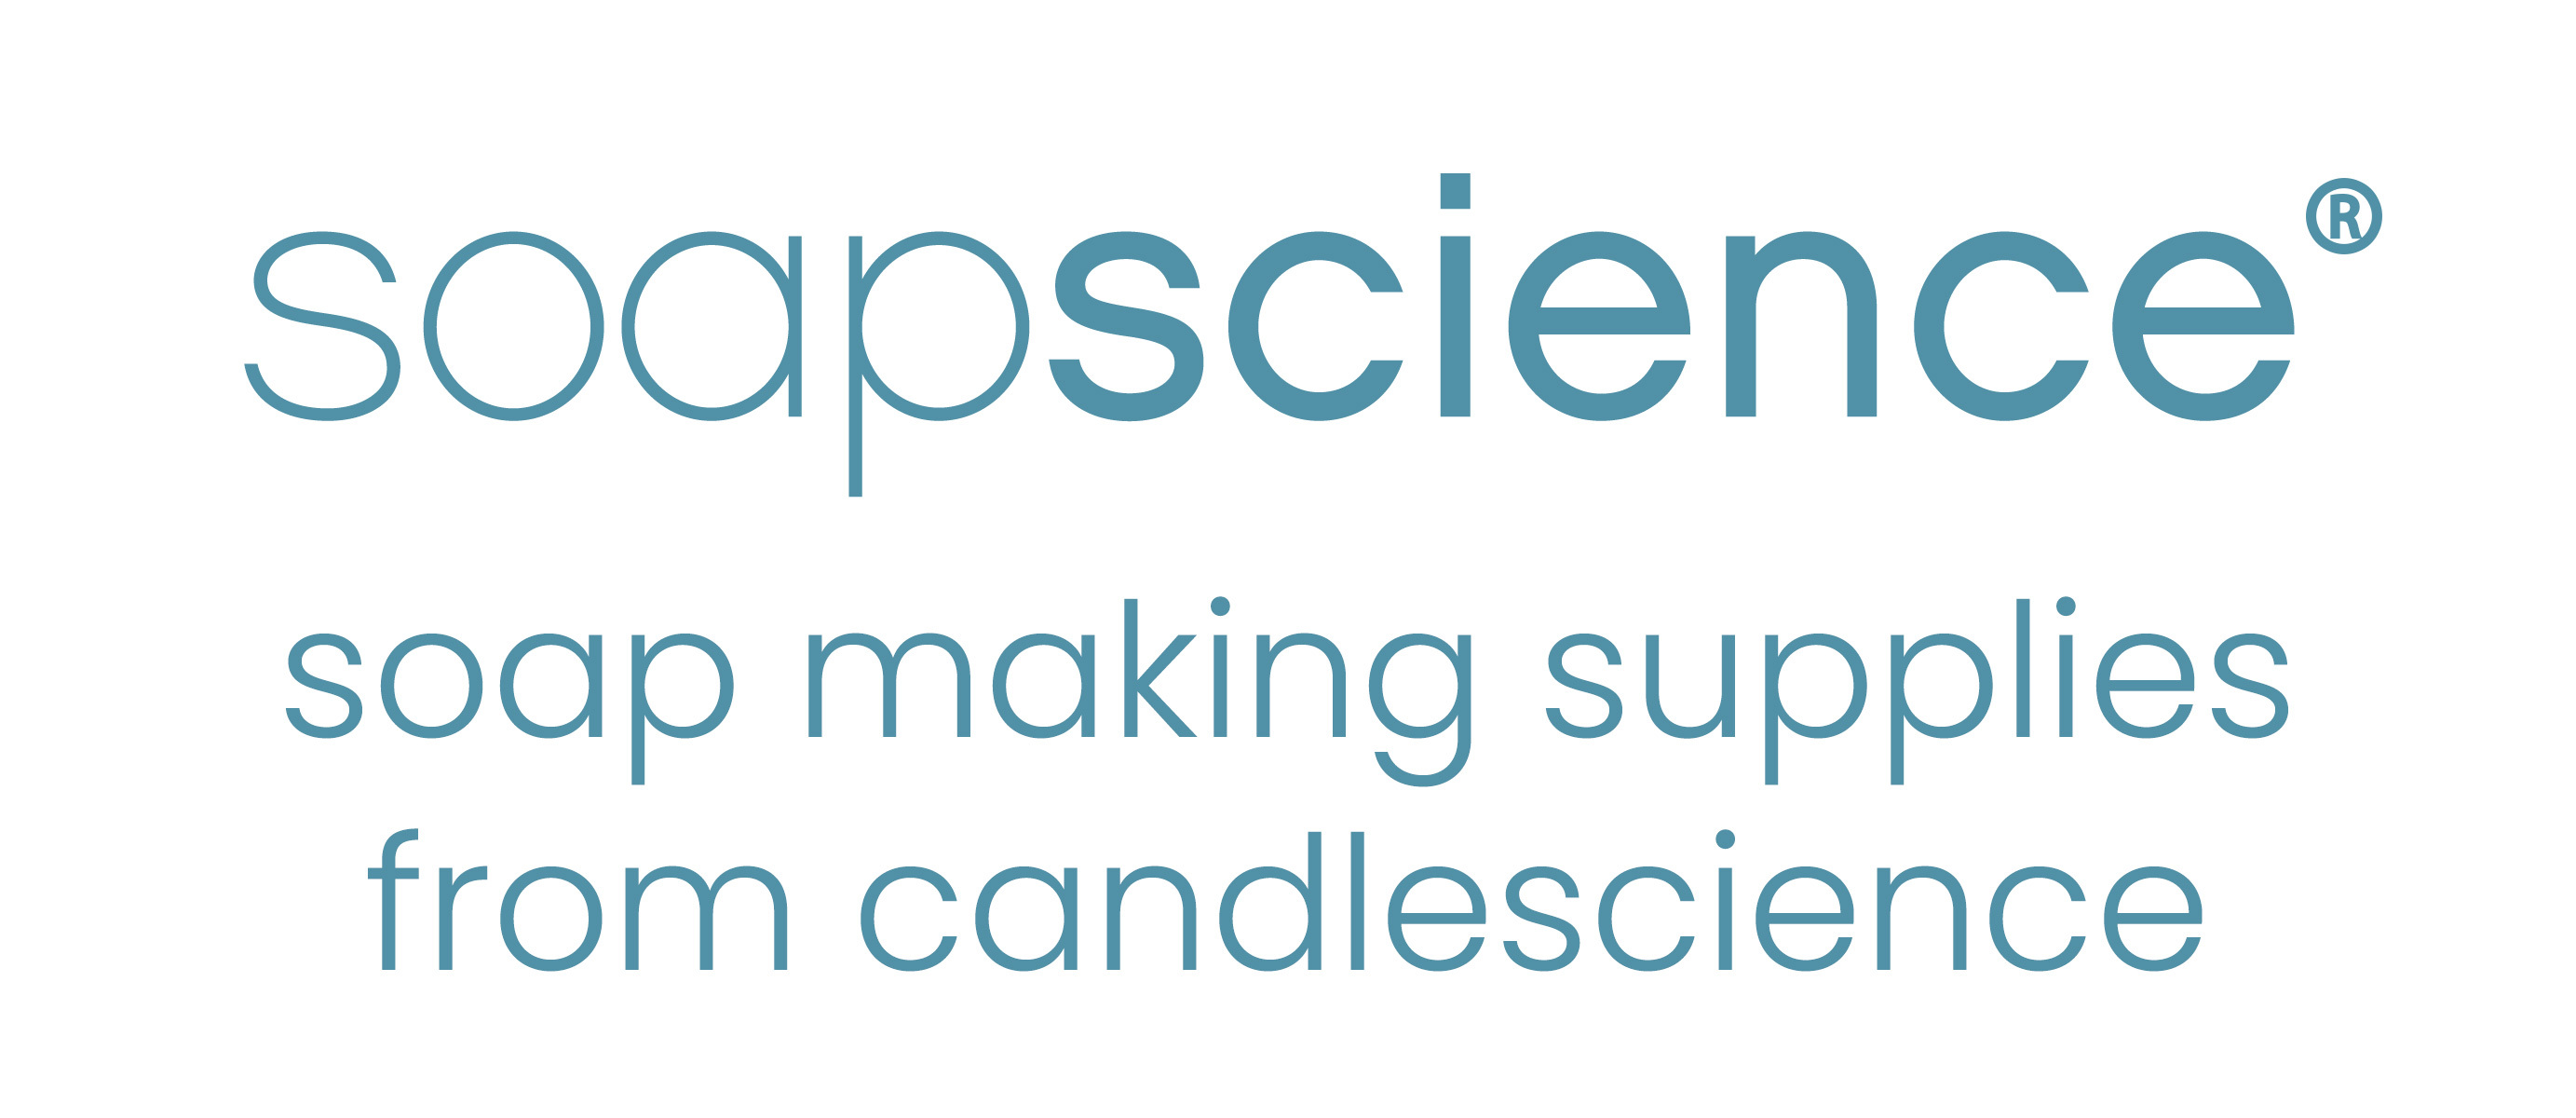 SoapScience Logo, soap making supplies from candlescience